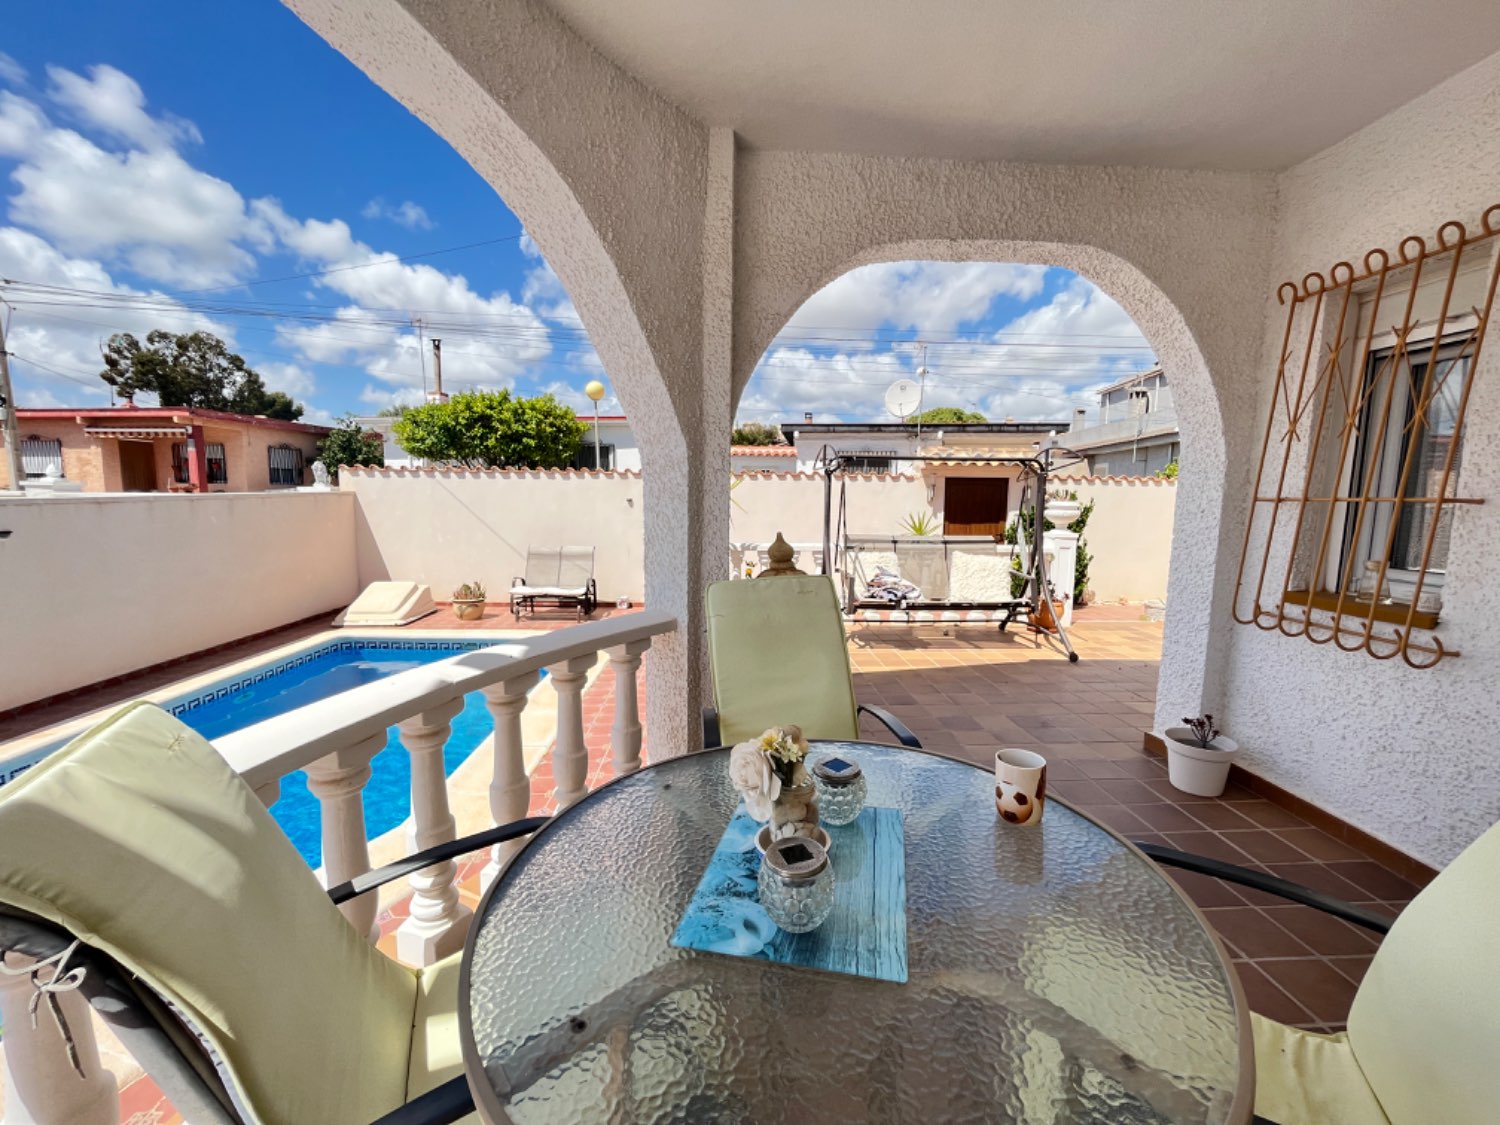 Beautiful villa with 4 bedrooms and 2 bathrooms with a private pool.